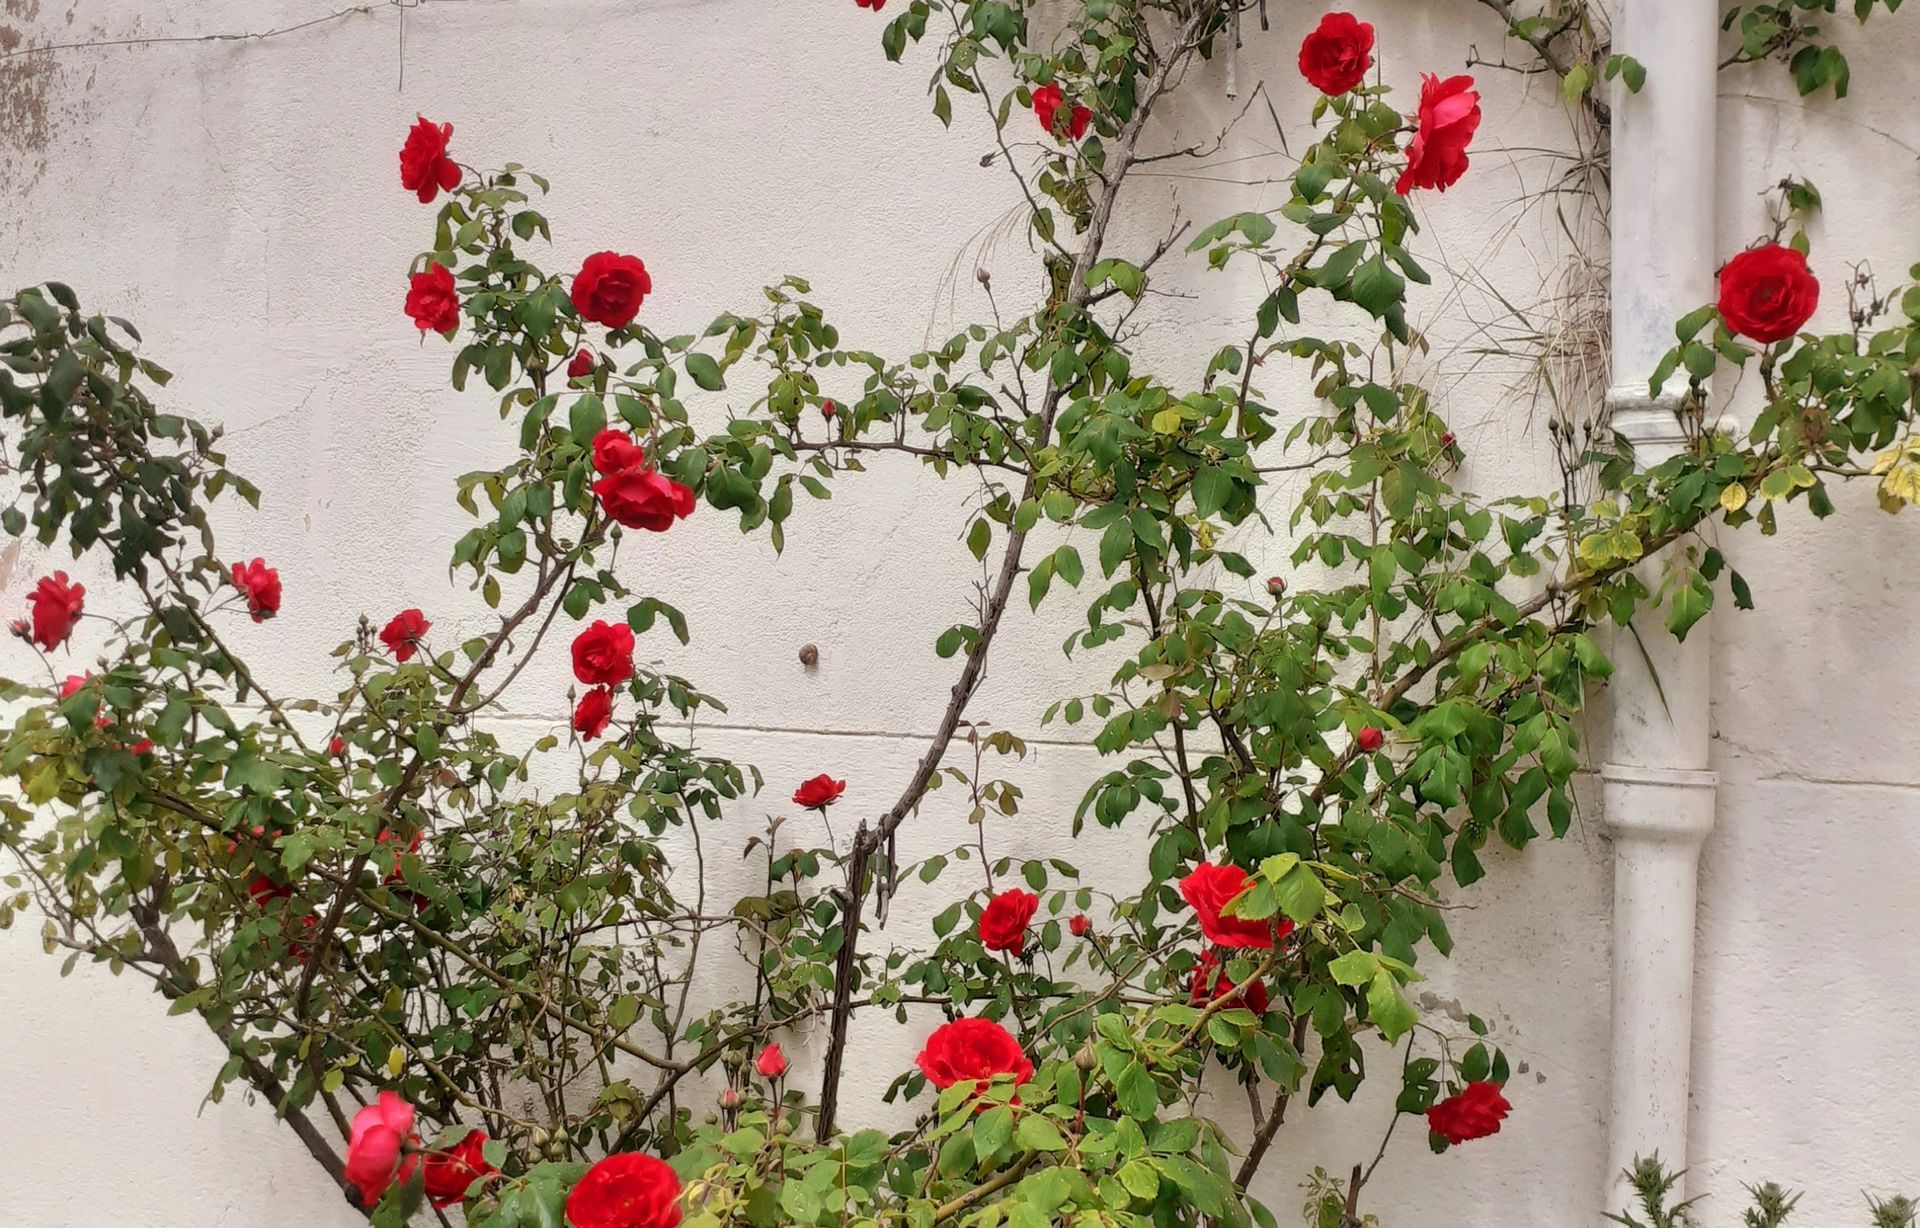 Red roses climbing side of building